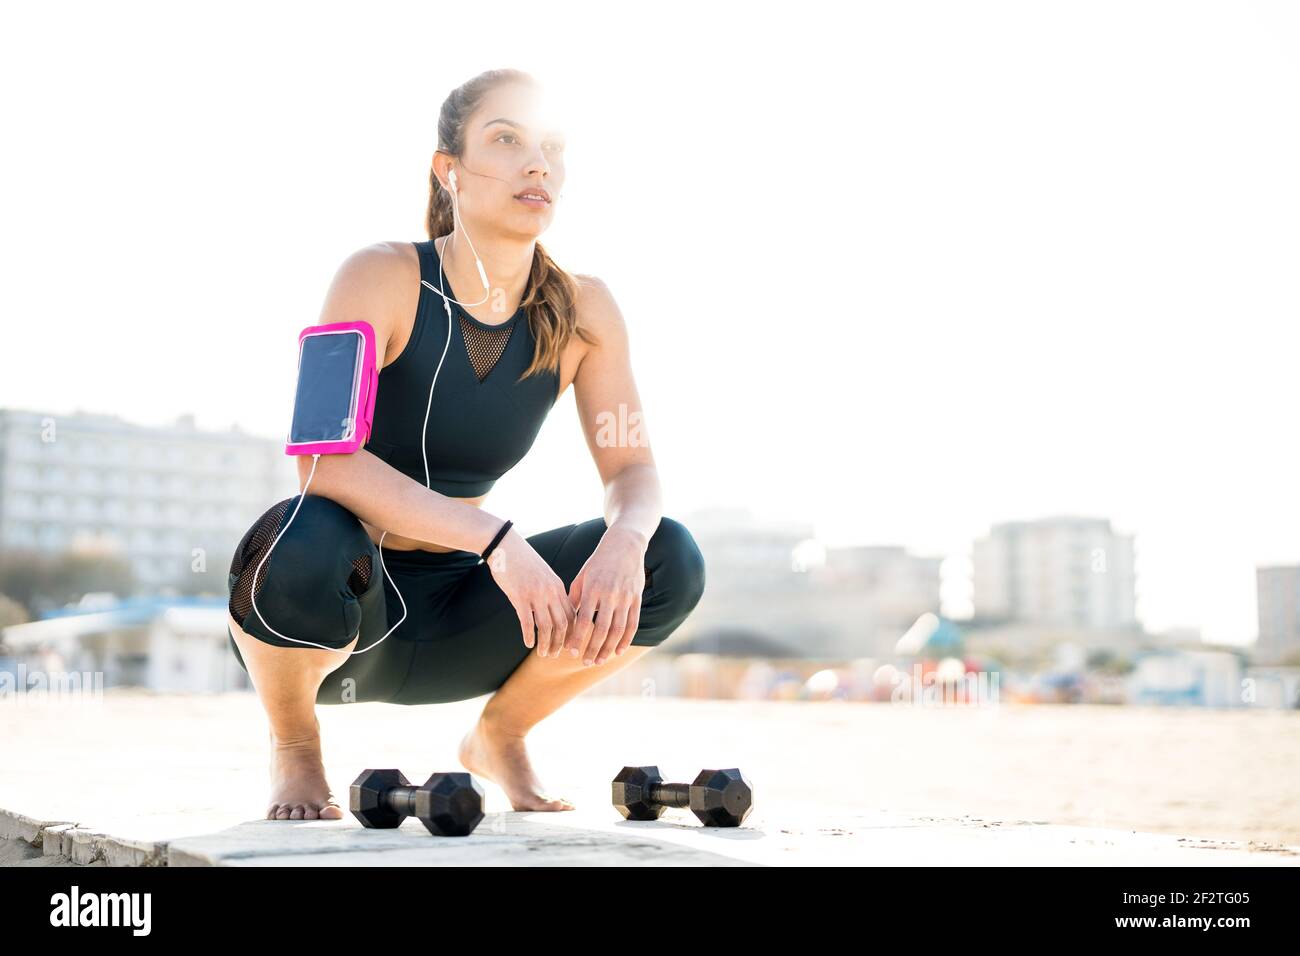 Portrait of athletic woman on a break moment listening music at outdoors beach location - Modern alternative work out and body care concept Stock Photo